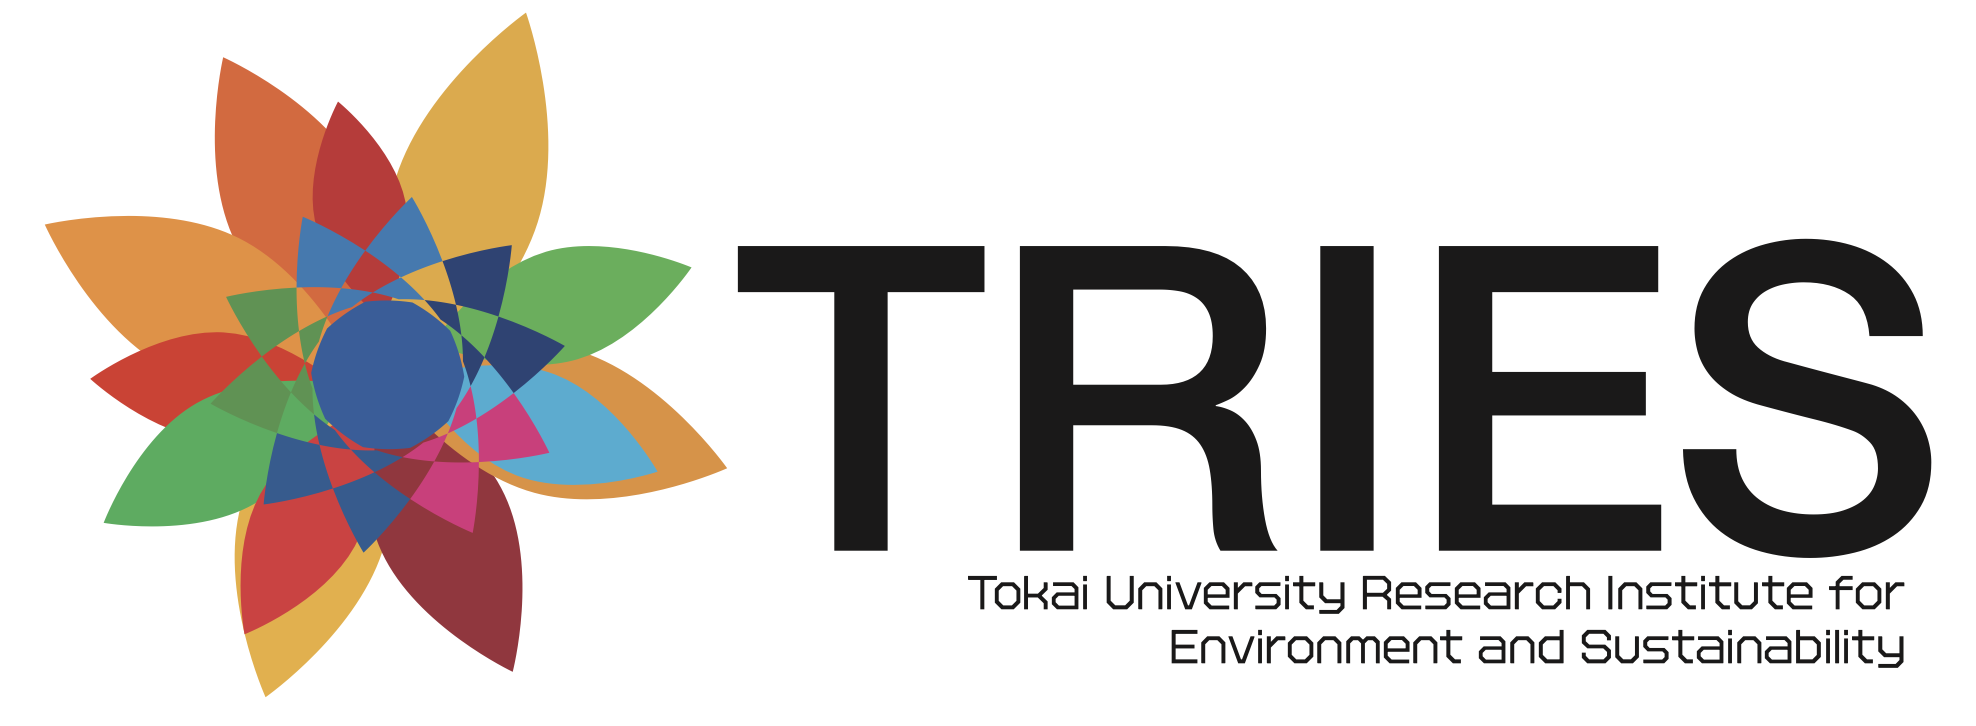 Tokai Research Institute for Environment and Sustainability